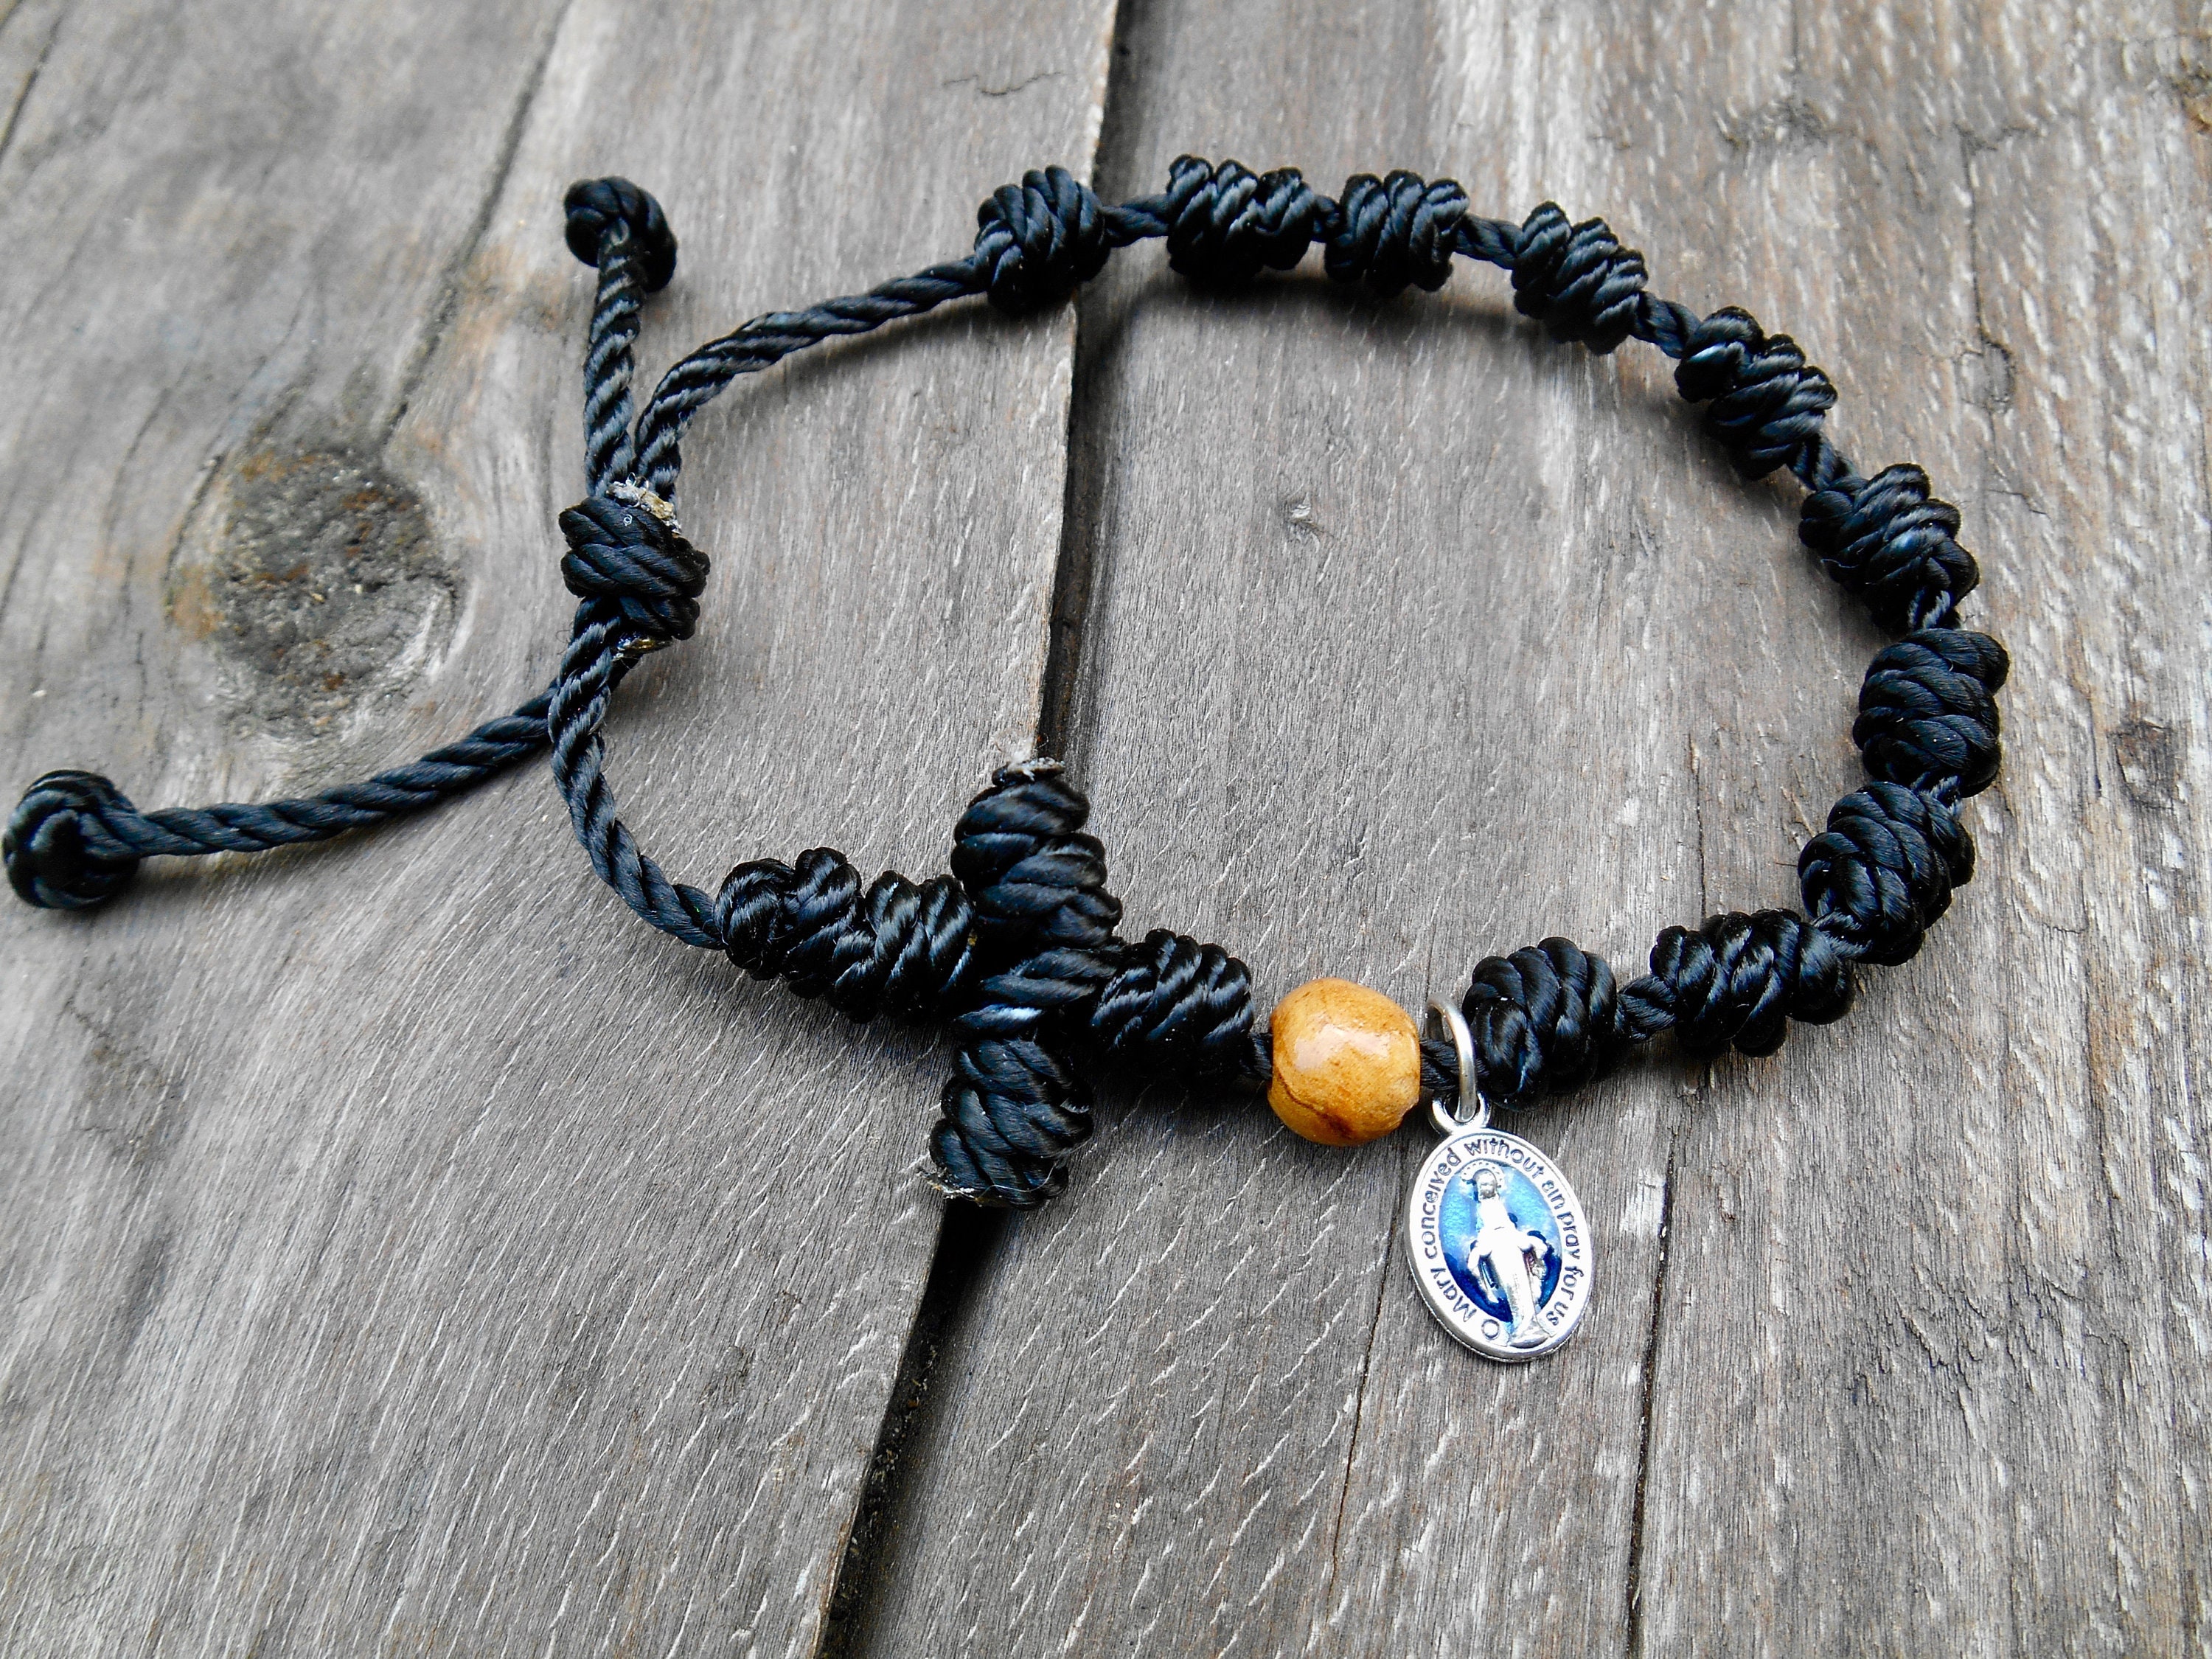 Knotted Rosary Bracelet, Black Cord Rosary, Pocket Rosary, Catholic Gift,  Single Decade, Confirmation Gift, Twine Rosary, Olive Wood Pater -   Hong Kong